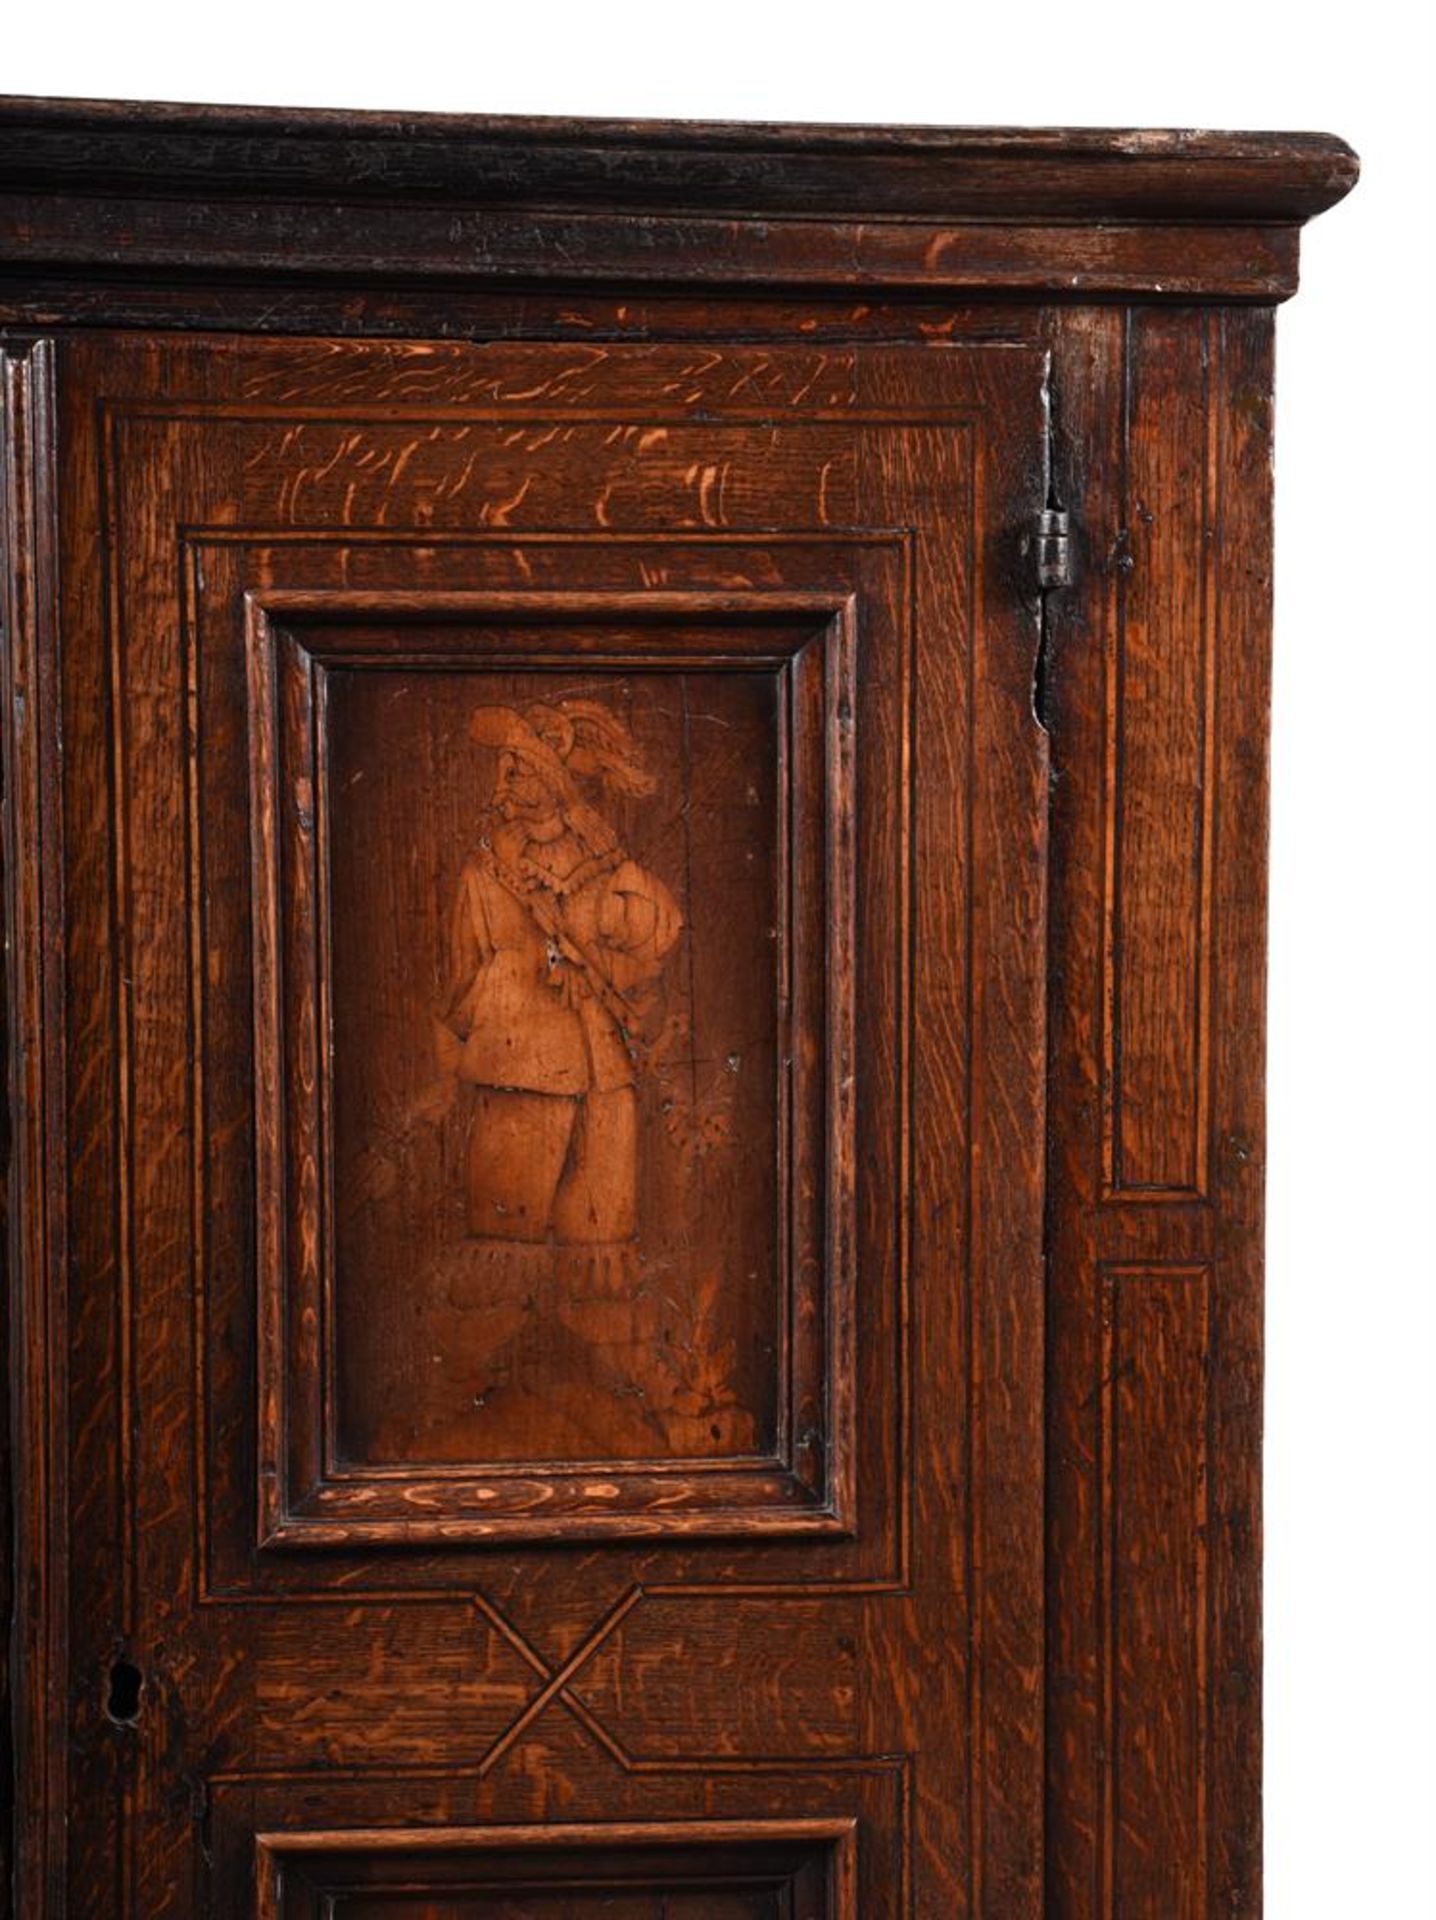 A CONTINENTAL OAK AND MARQUETRY CUPBOARD LATE 17TH/EARLY 18TH CENTURY - Image 4 of 6